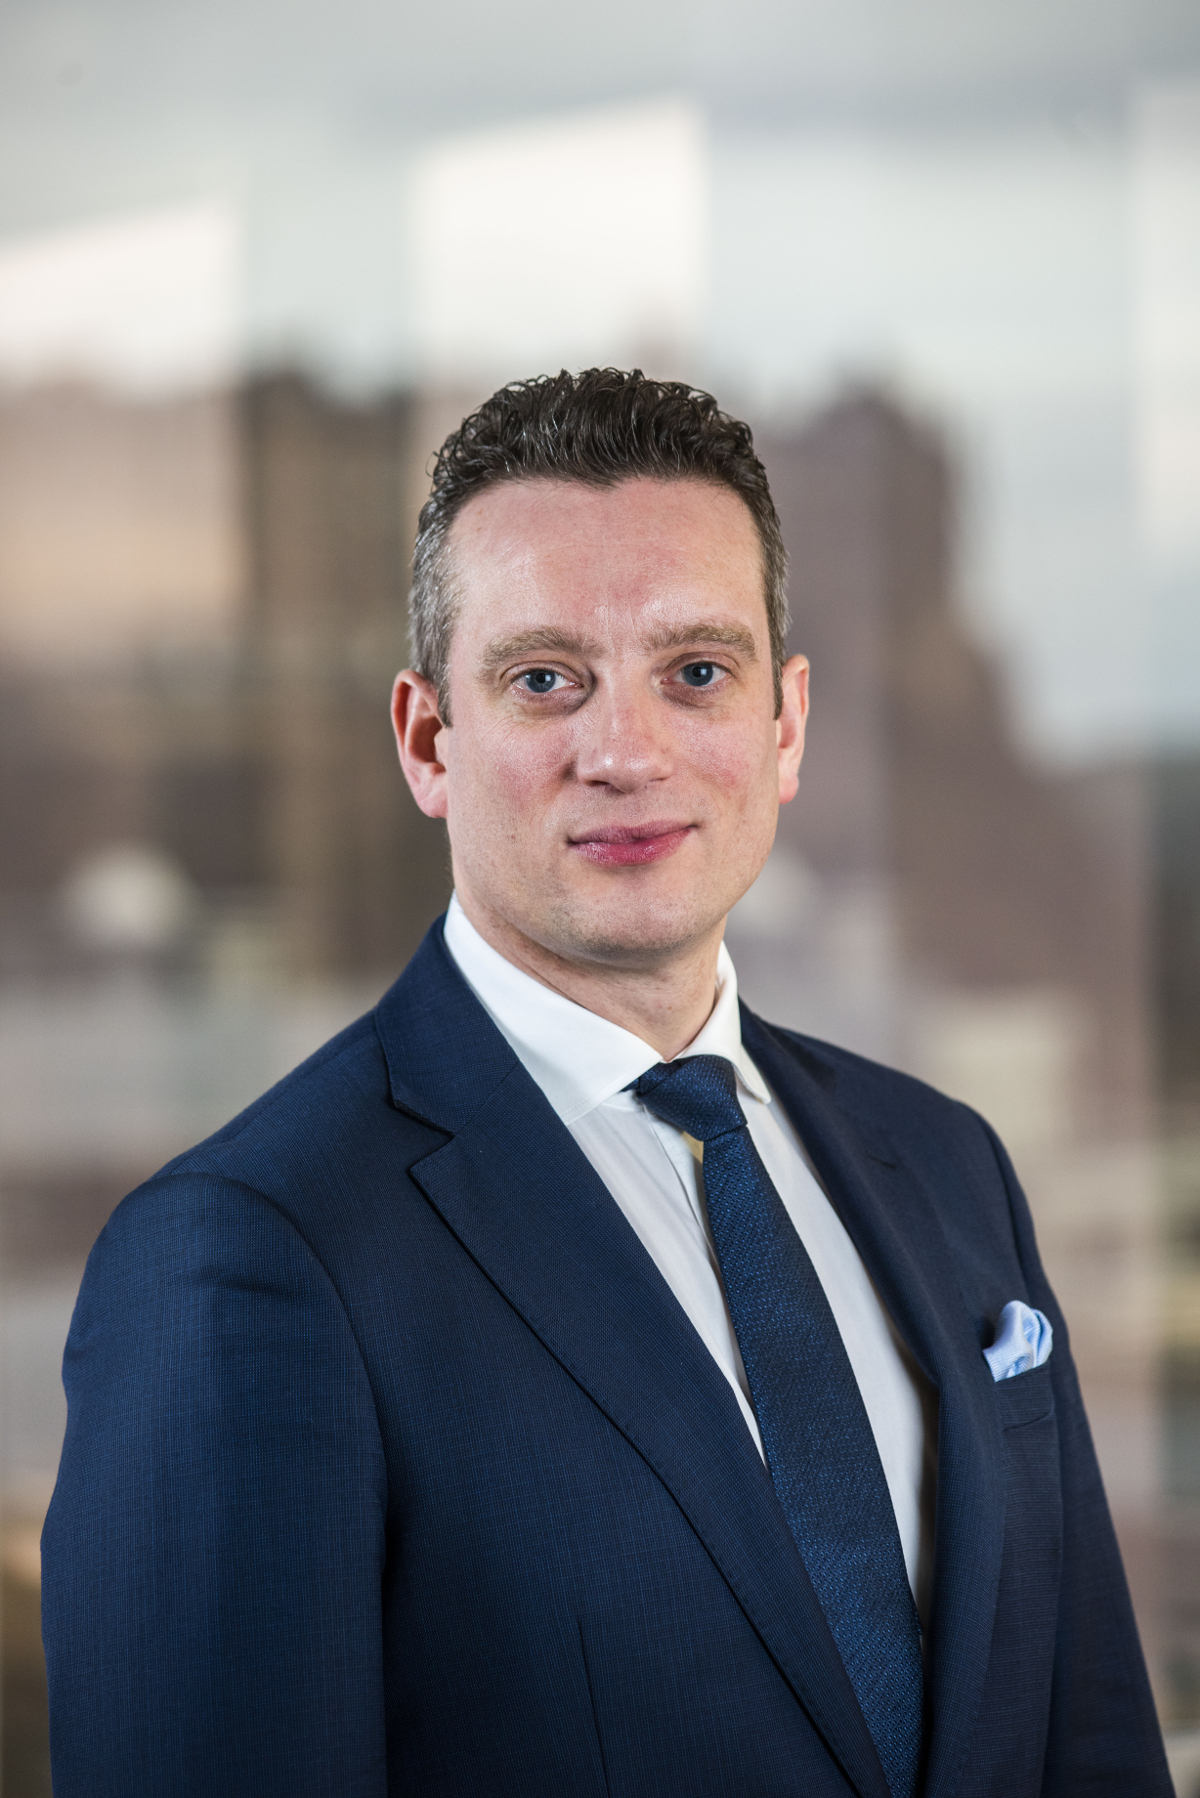 Addleshaw Goddard appoints Robert Phillips as legal director